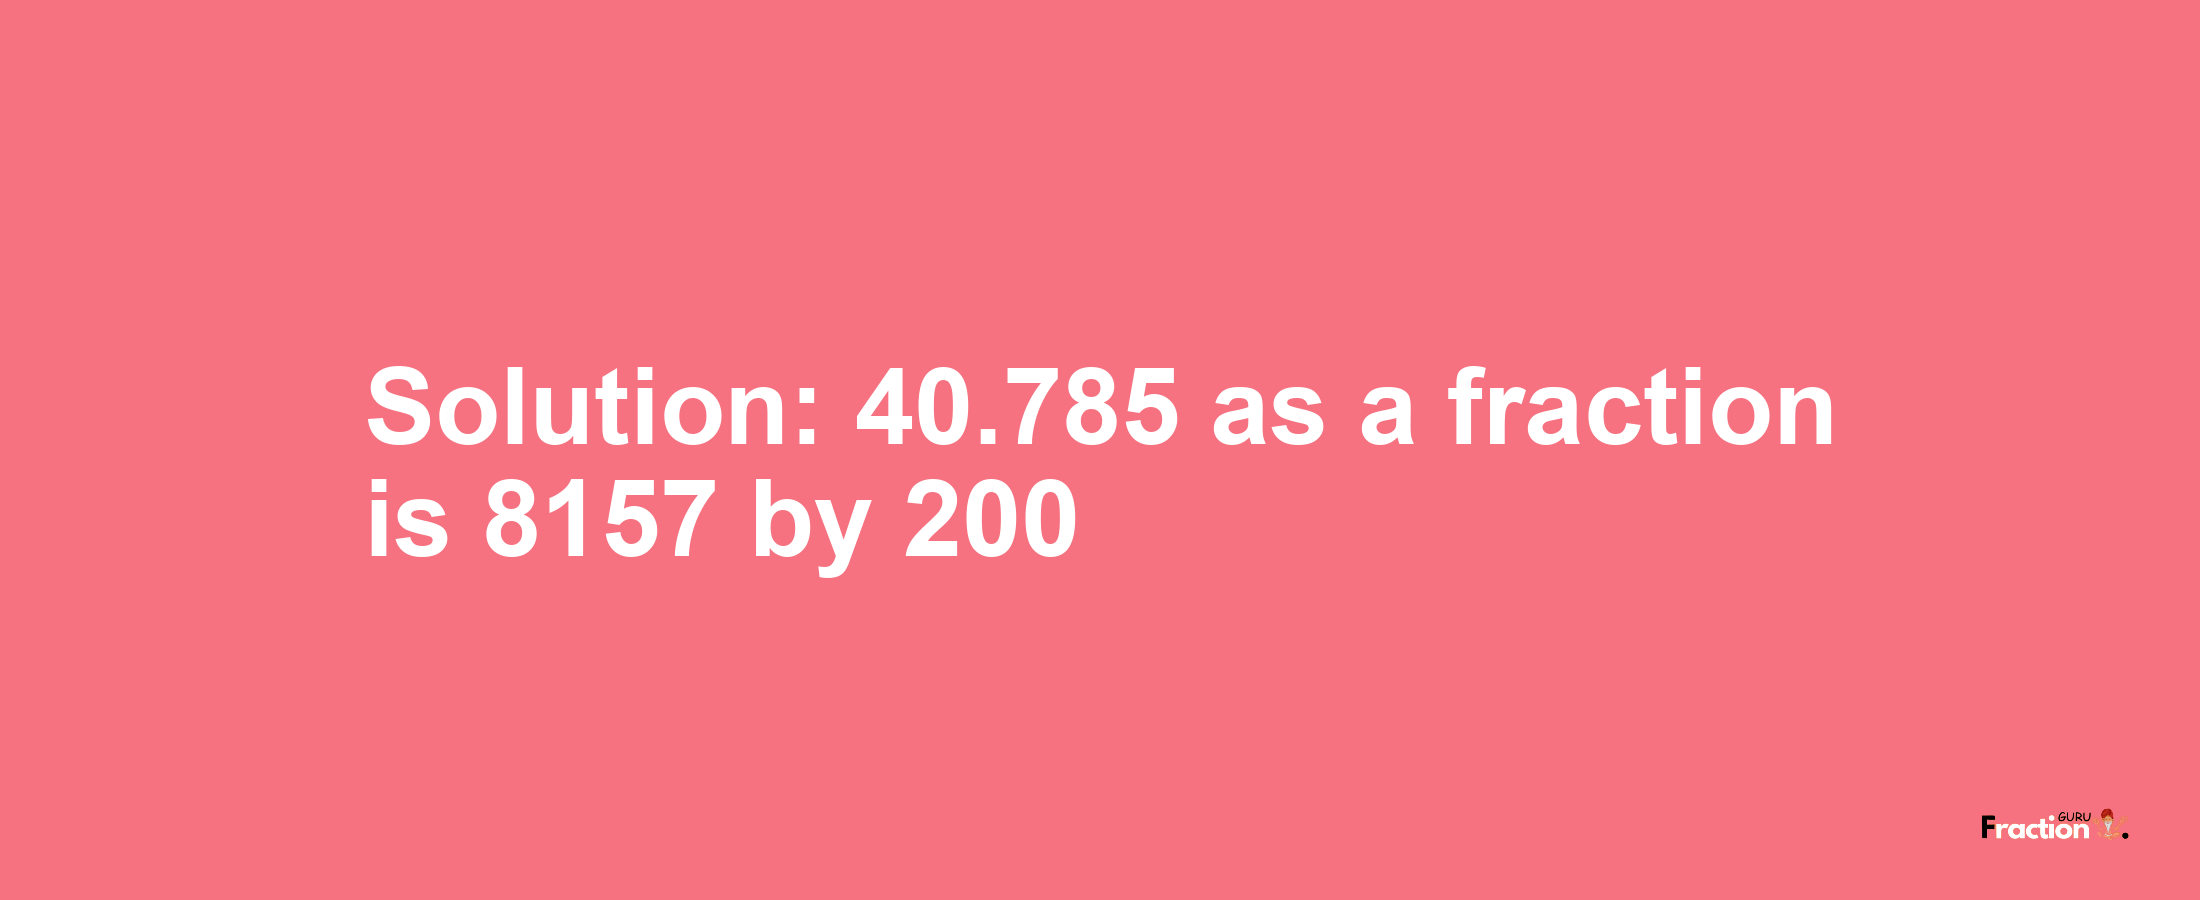 Solution:40.785 as a fraction is 8157/200